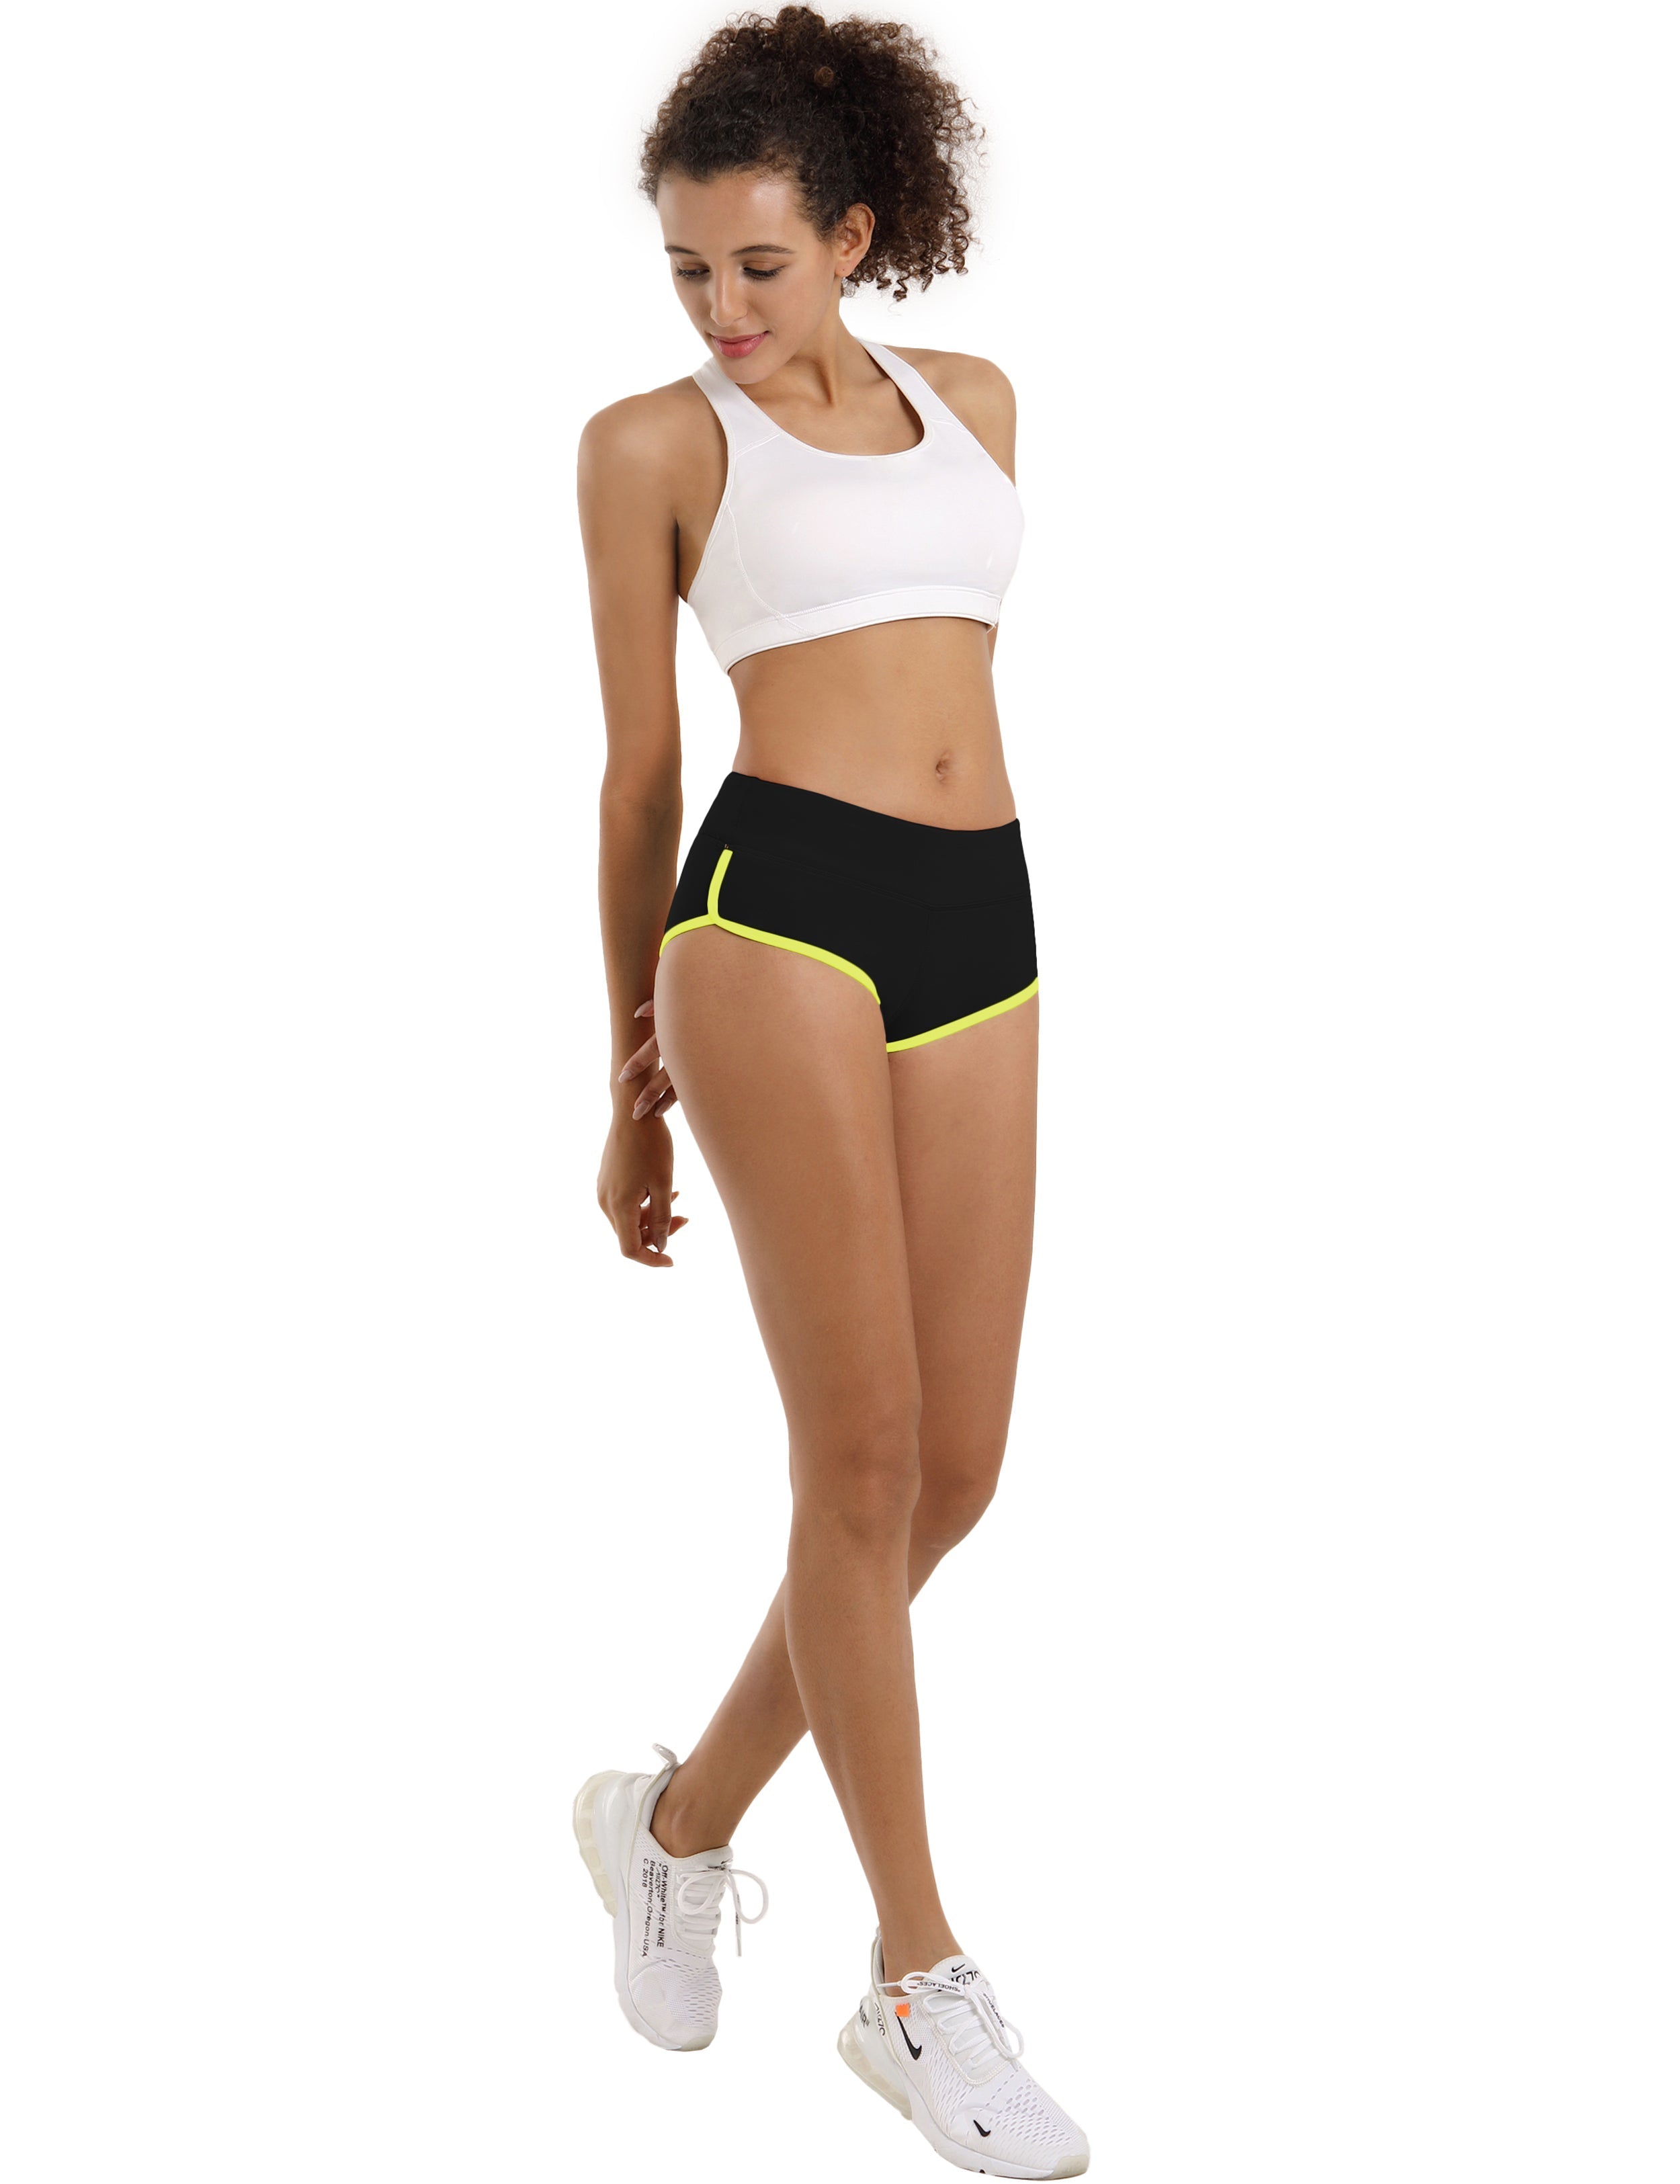 Sexy Booty Gym Shorts black_fluorescentyellow Sleek, soft, smooth and totally comfortable: our newest sexy style is here. Softest-ever fabric High elasticity High density 4-way stretch Fabric doesn't attract lint easily No see-through Moisture-wicking Machine wash 75%Nylon/25%Spandex